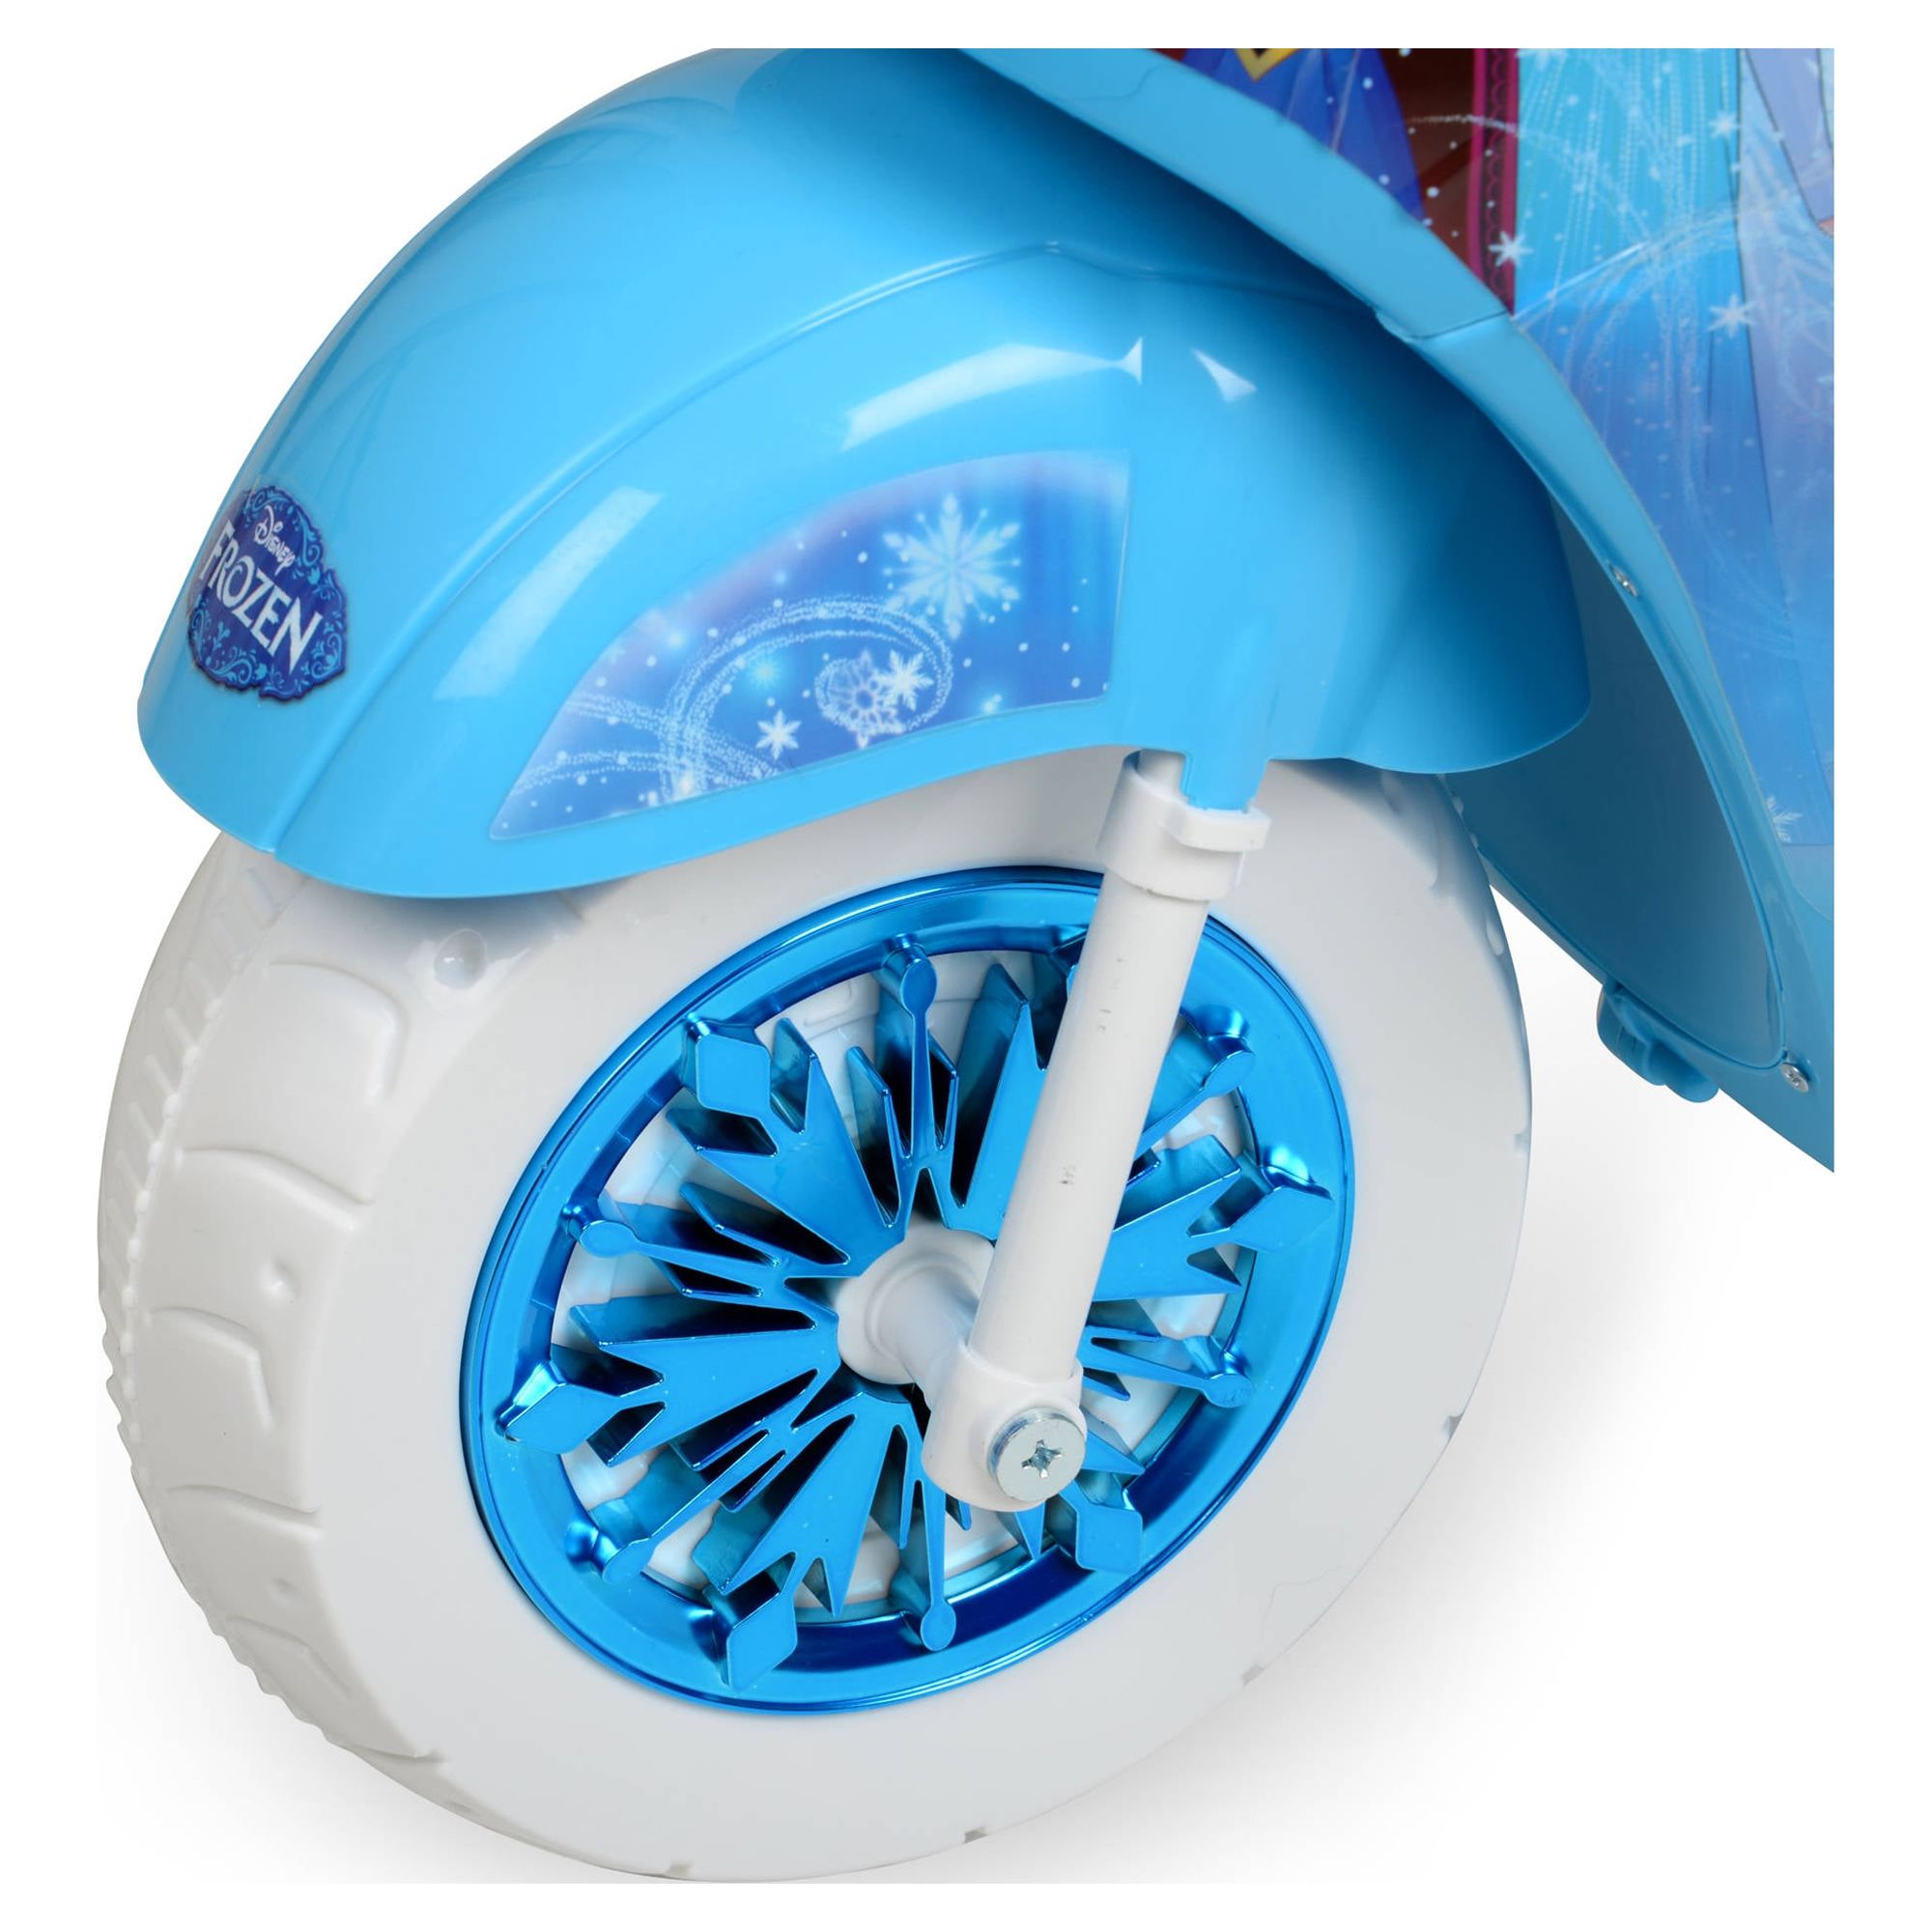 6 Volt Disney Frozen 3-Wheel Scooter Battery Powered Ride-On - image 5 of 6